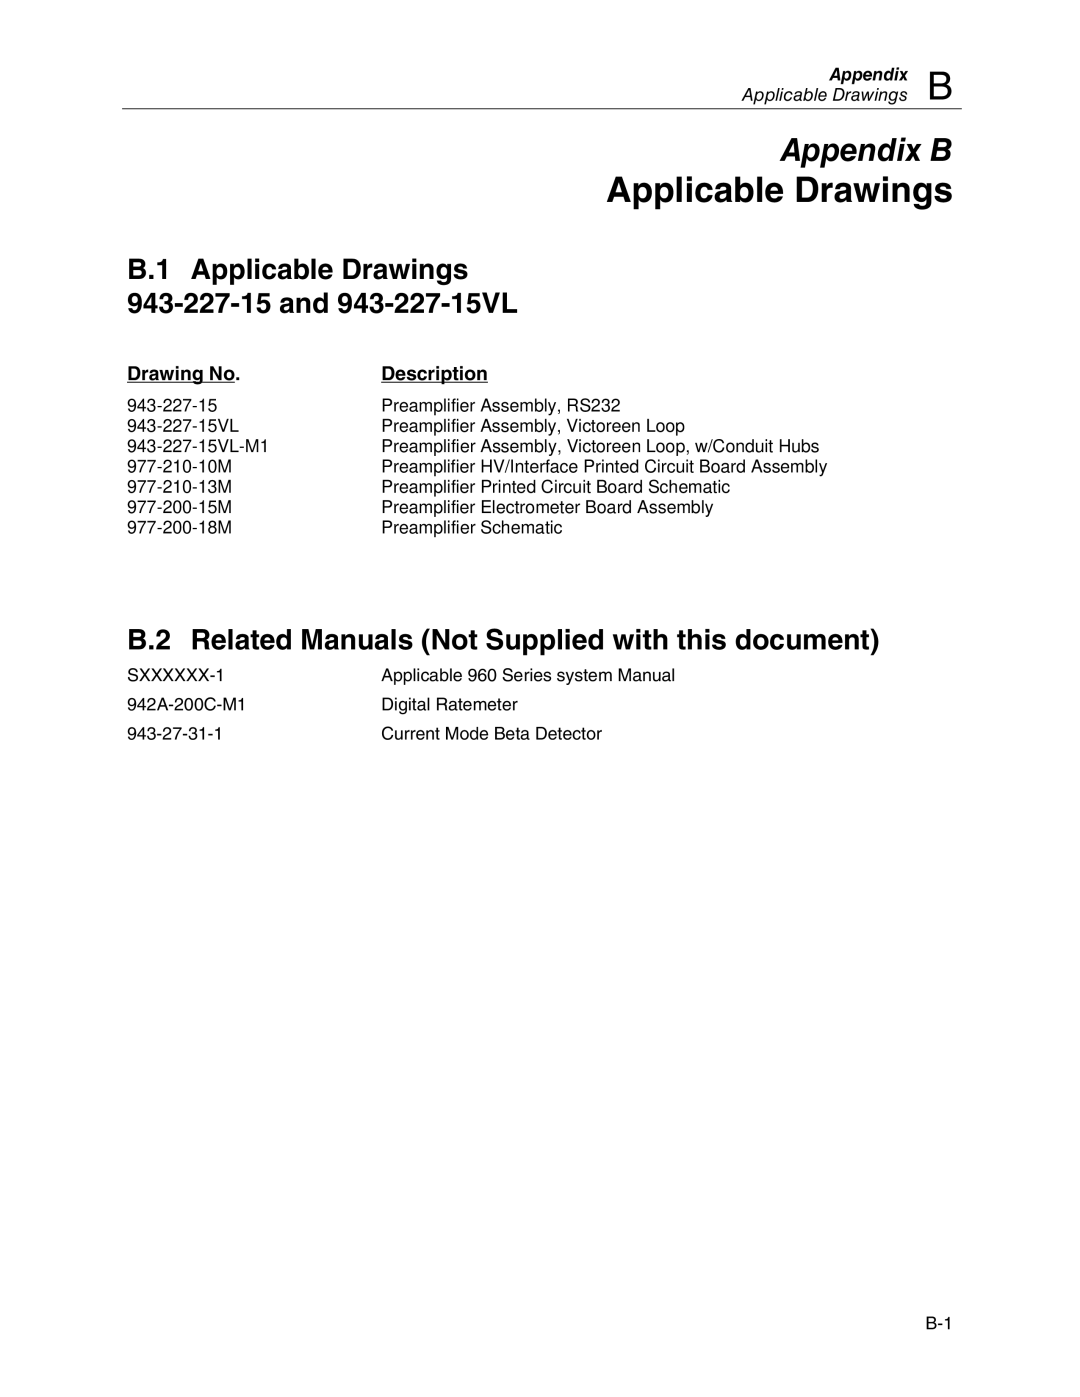 Fluke 943-27 manual Applicable Drawings 943-227-15VL, Related Manuals Not Supplied with this document 